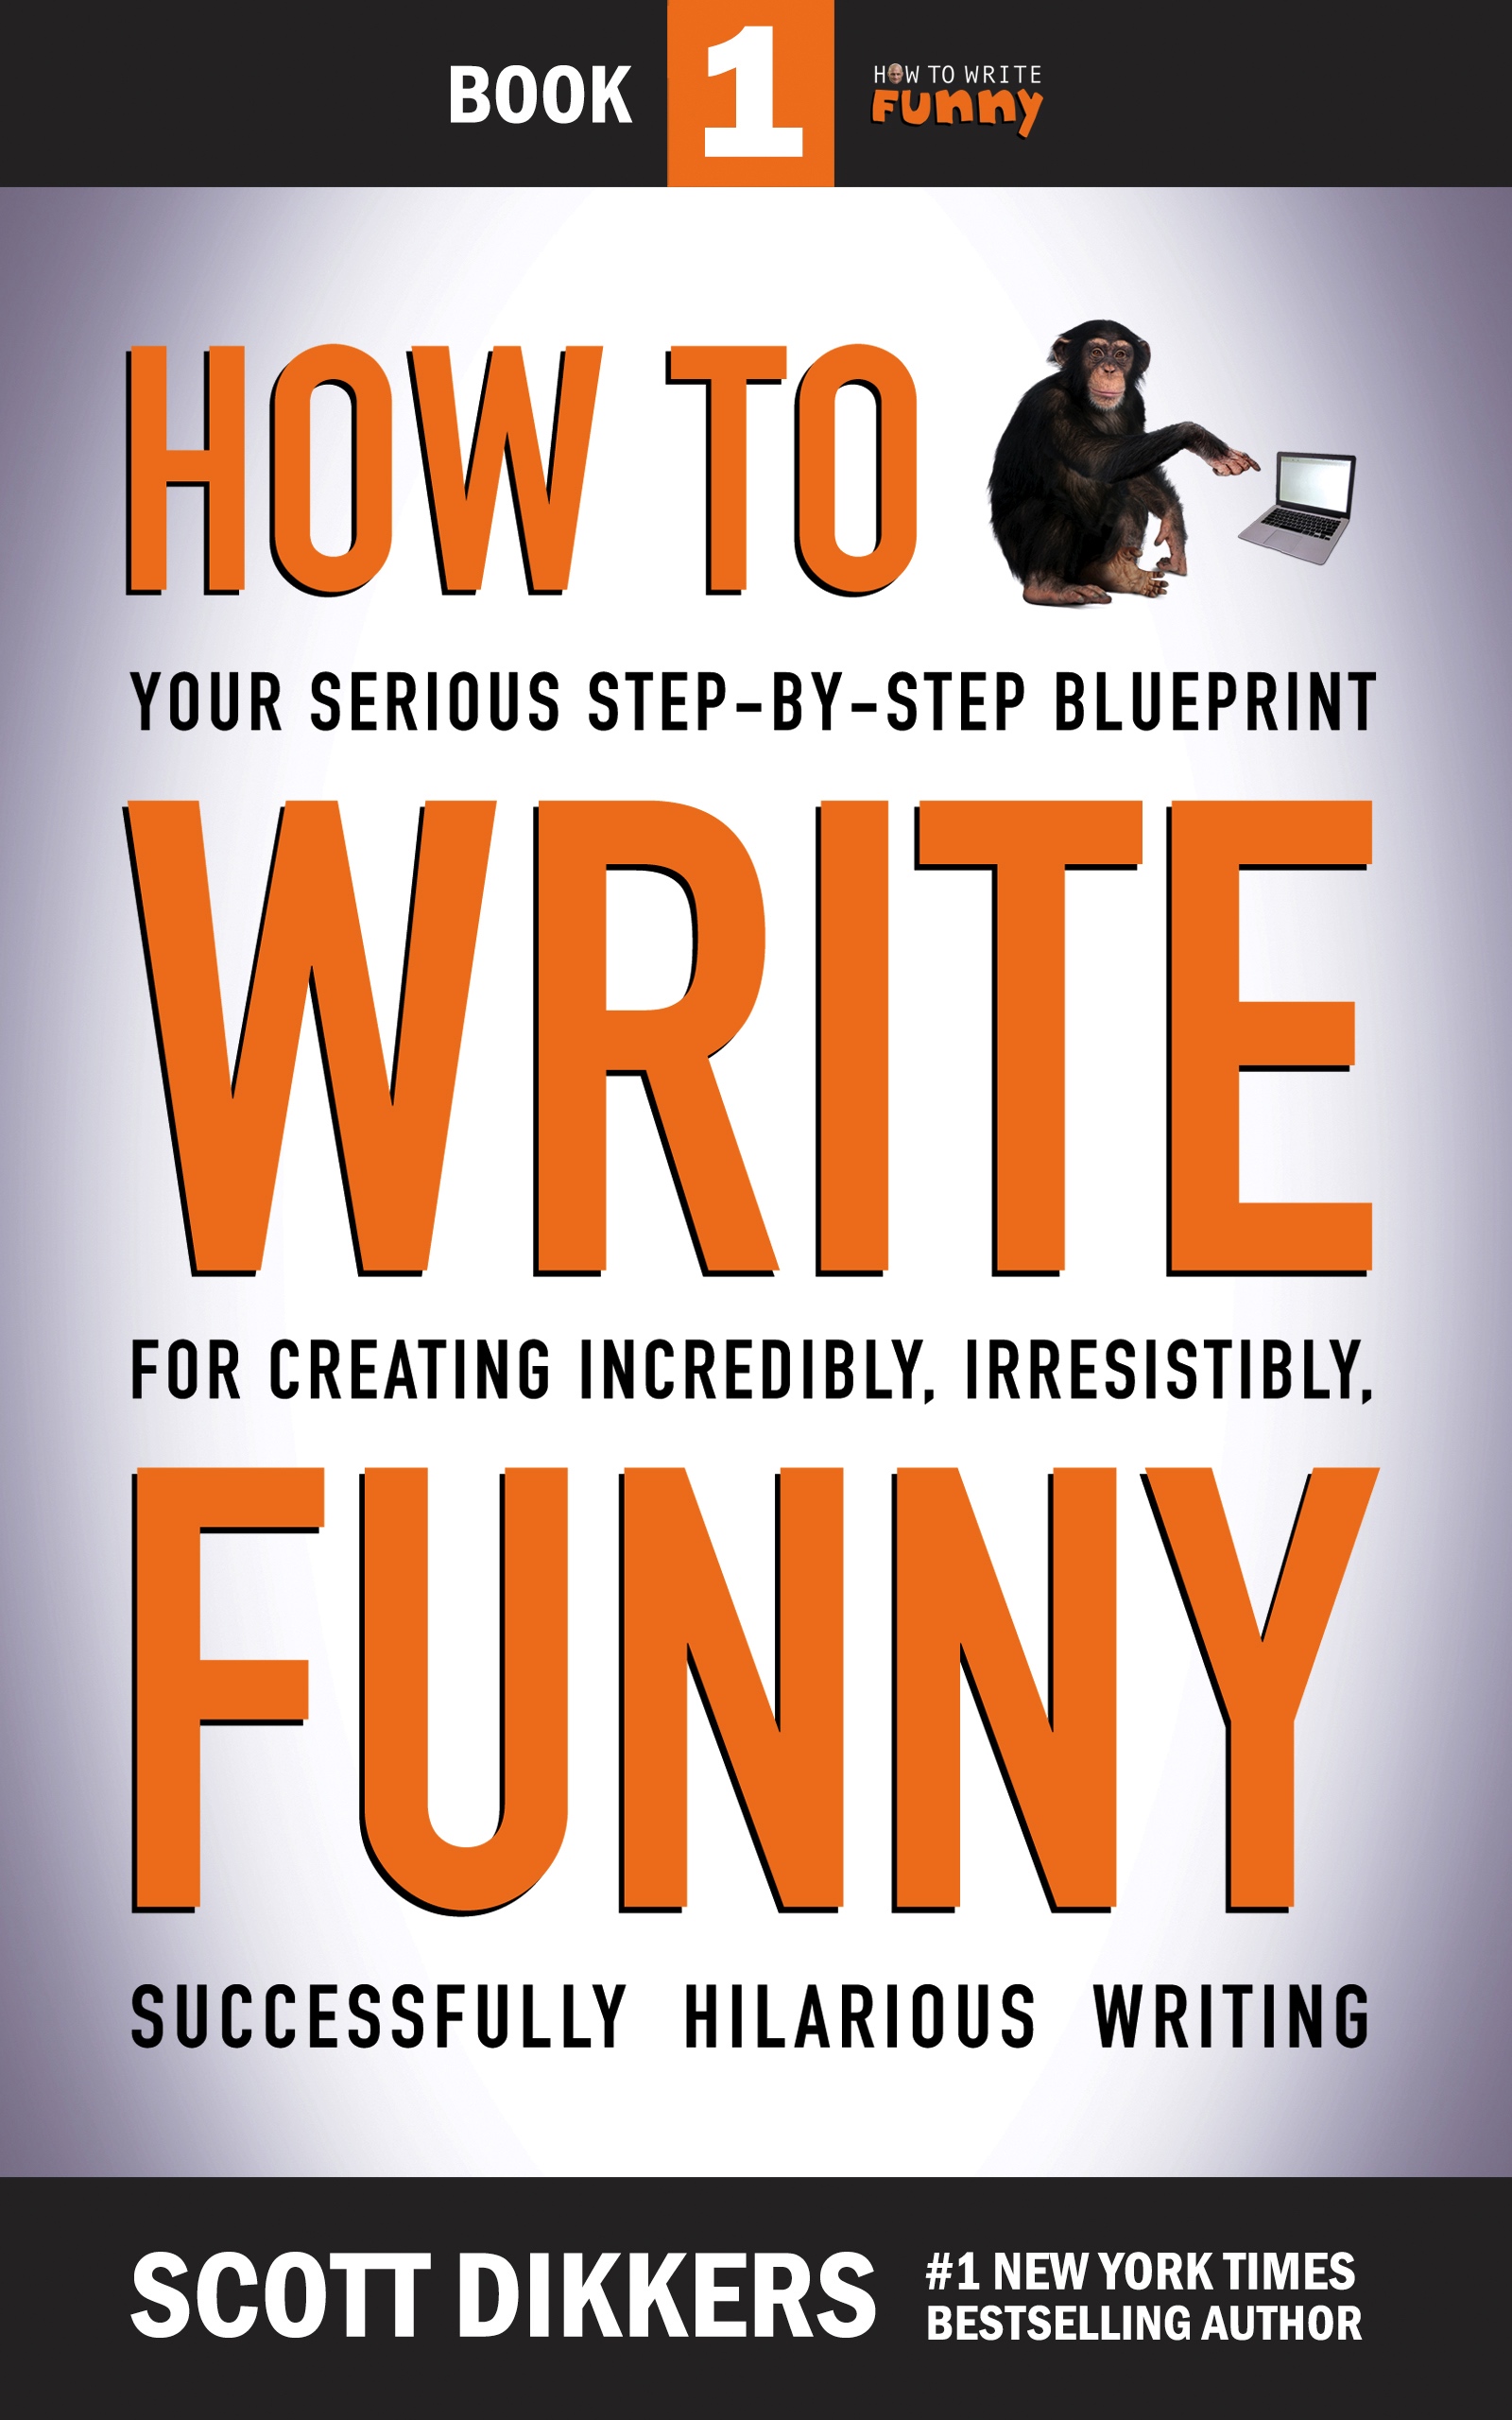 How to Write Funny book cover